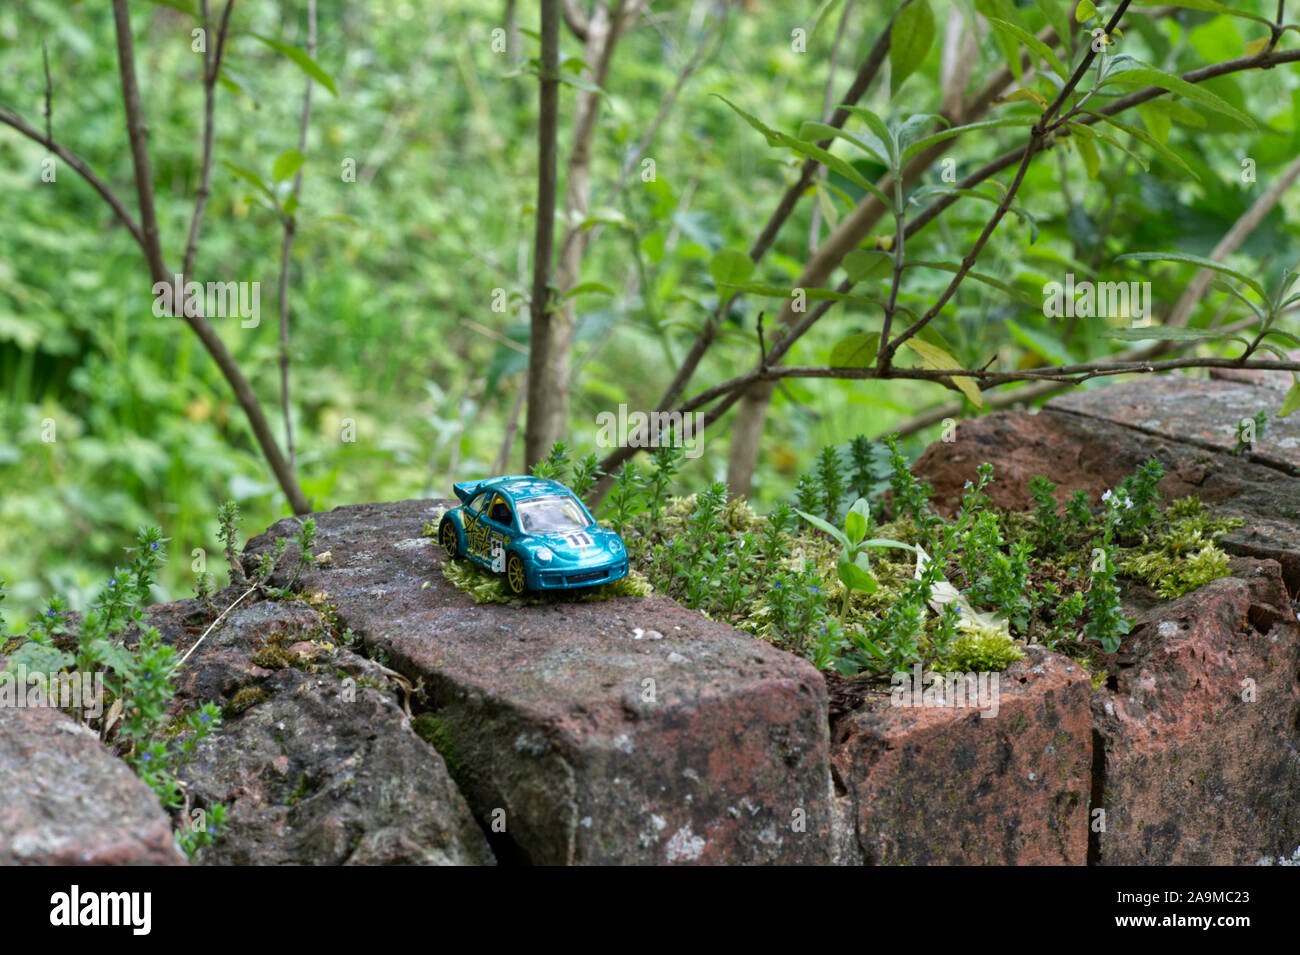 Child's toy beetle on a wall in the woodlands Stock Photo